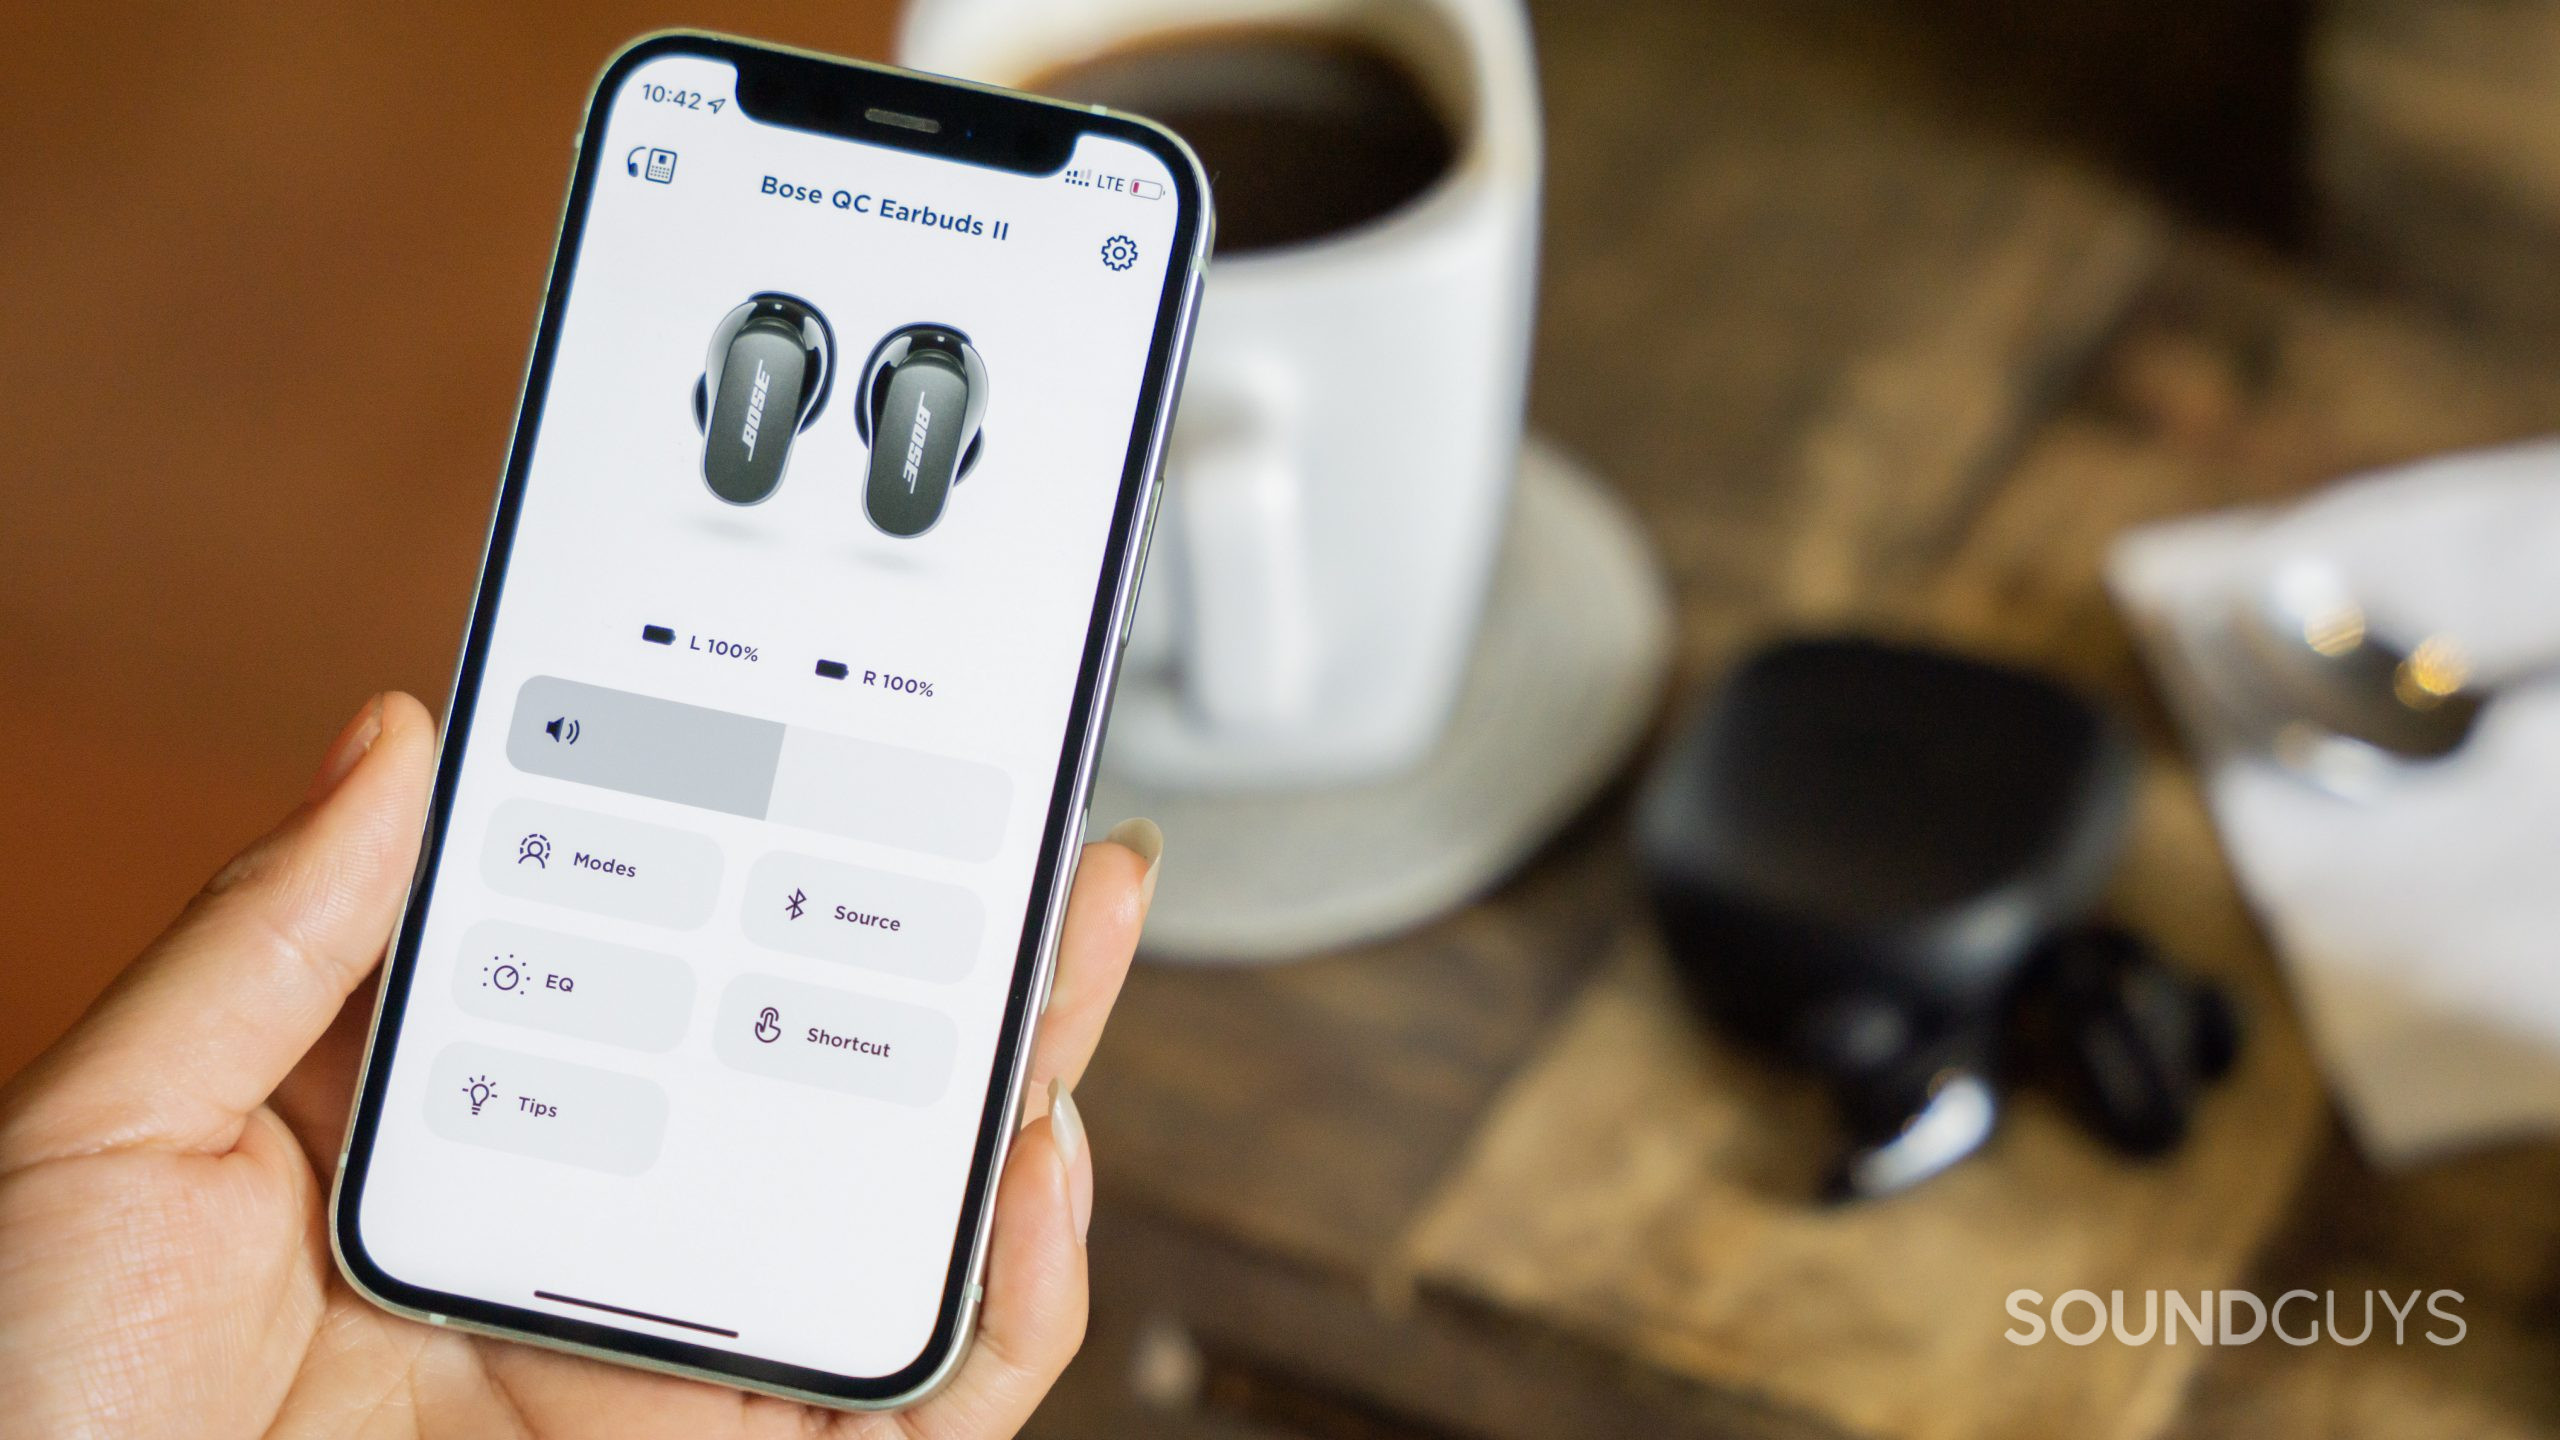 The Bose Music App allows greater control options for the Bose QuietComfort Earbuds II.